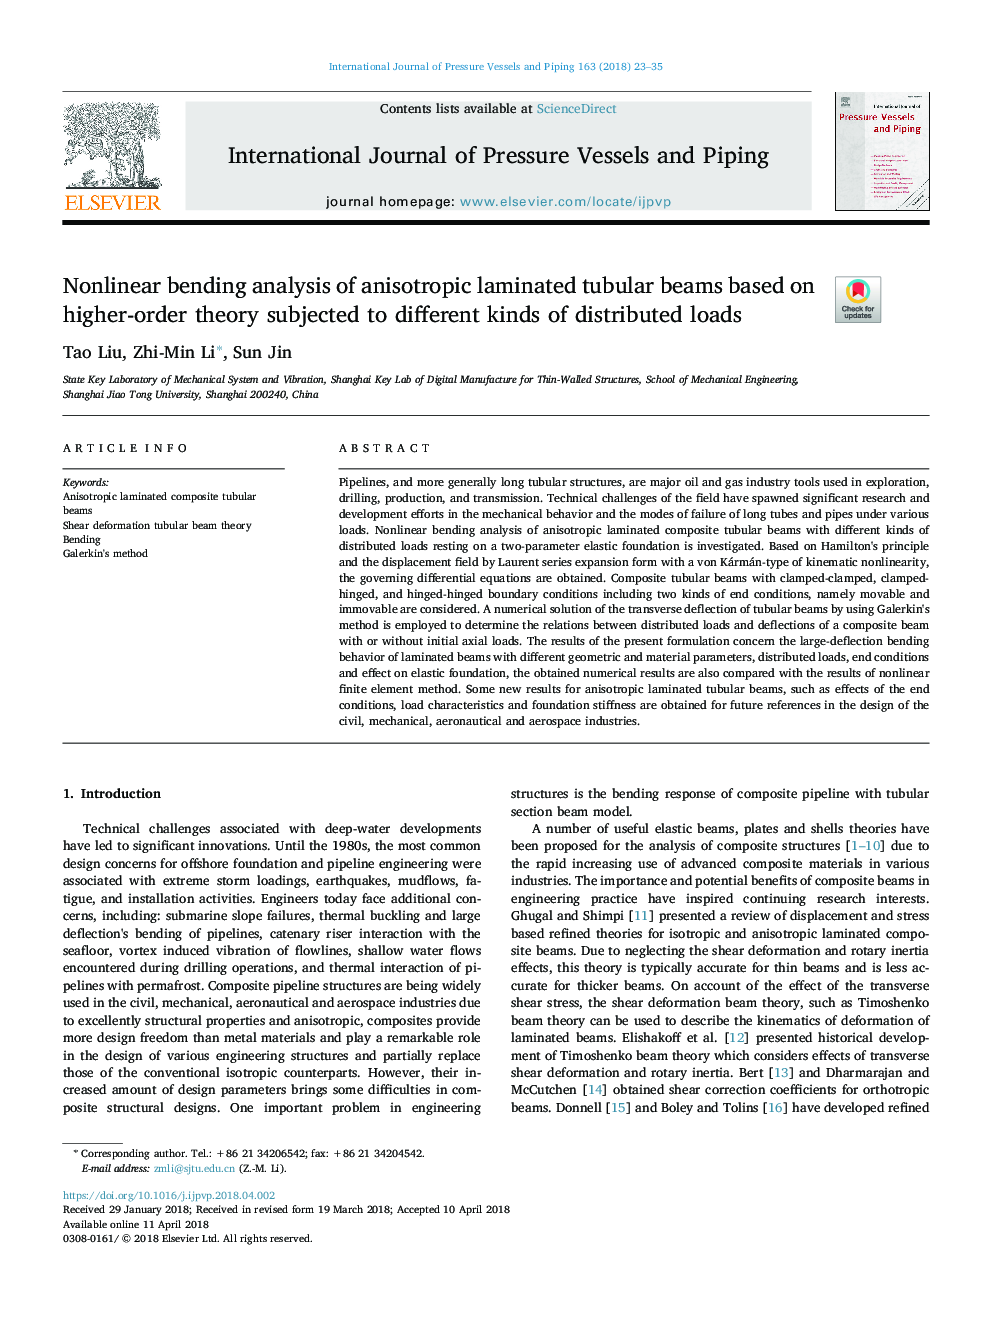 Nonlinear bending analysis of anisotropic laminated tubular beams based on higher-order theory subjected to different kinds of distributed loads